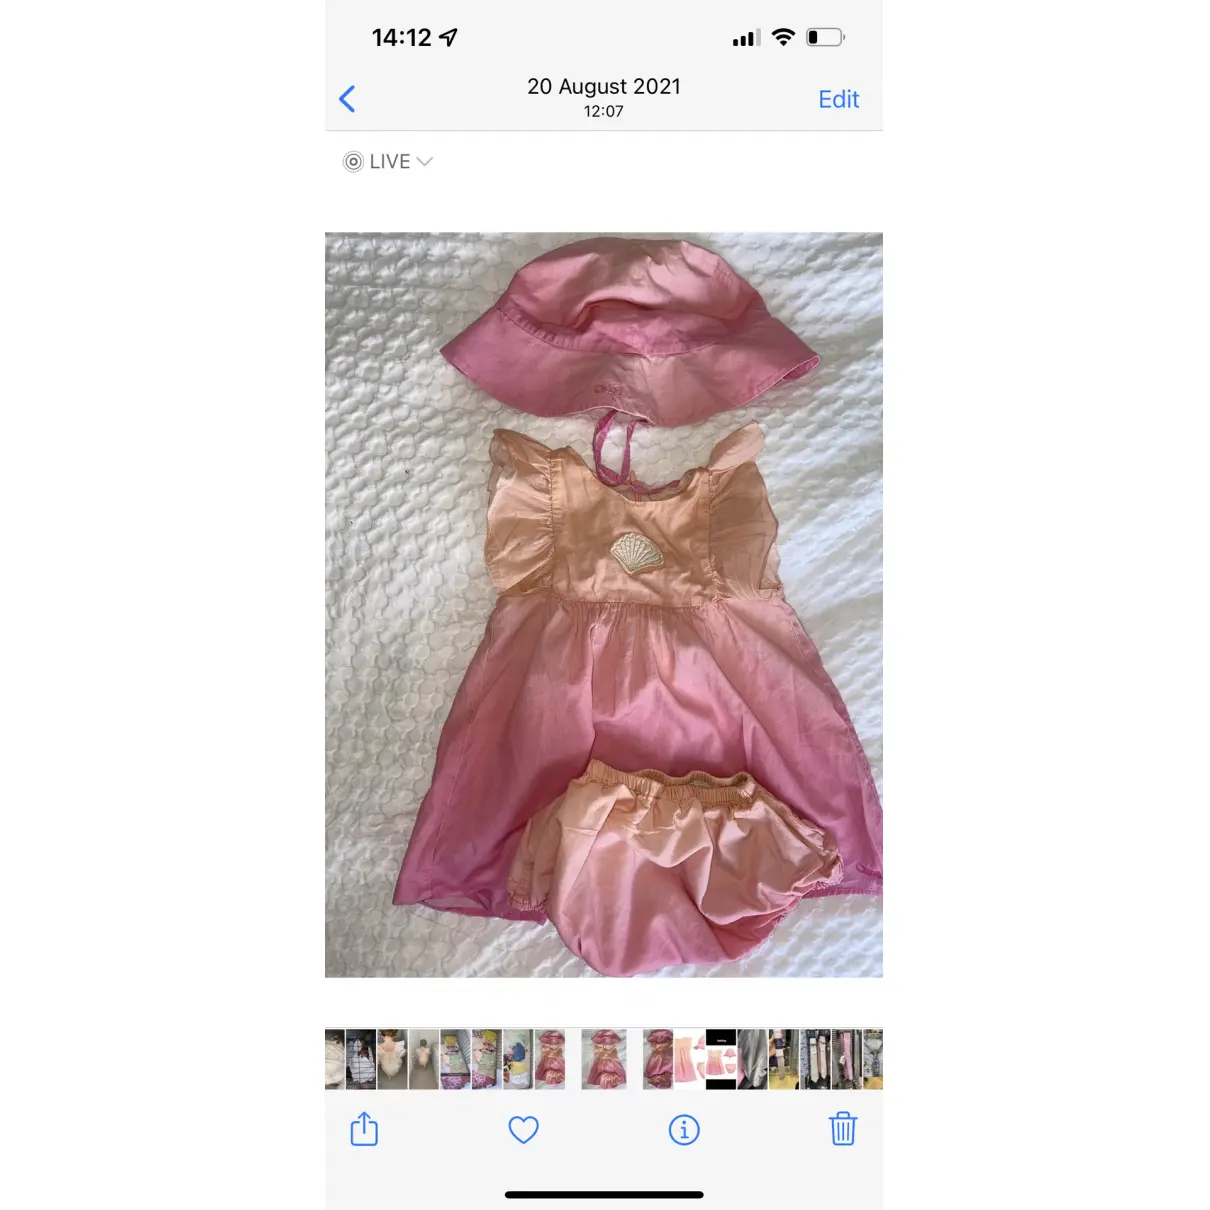 Buy Chloé Outfit online